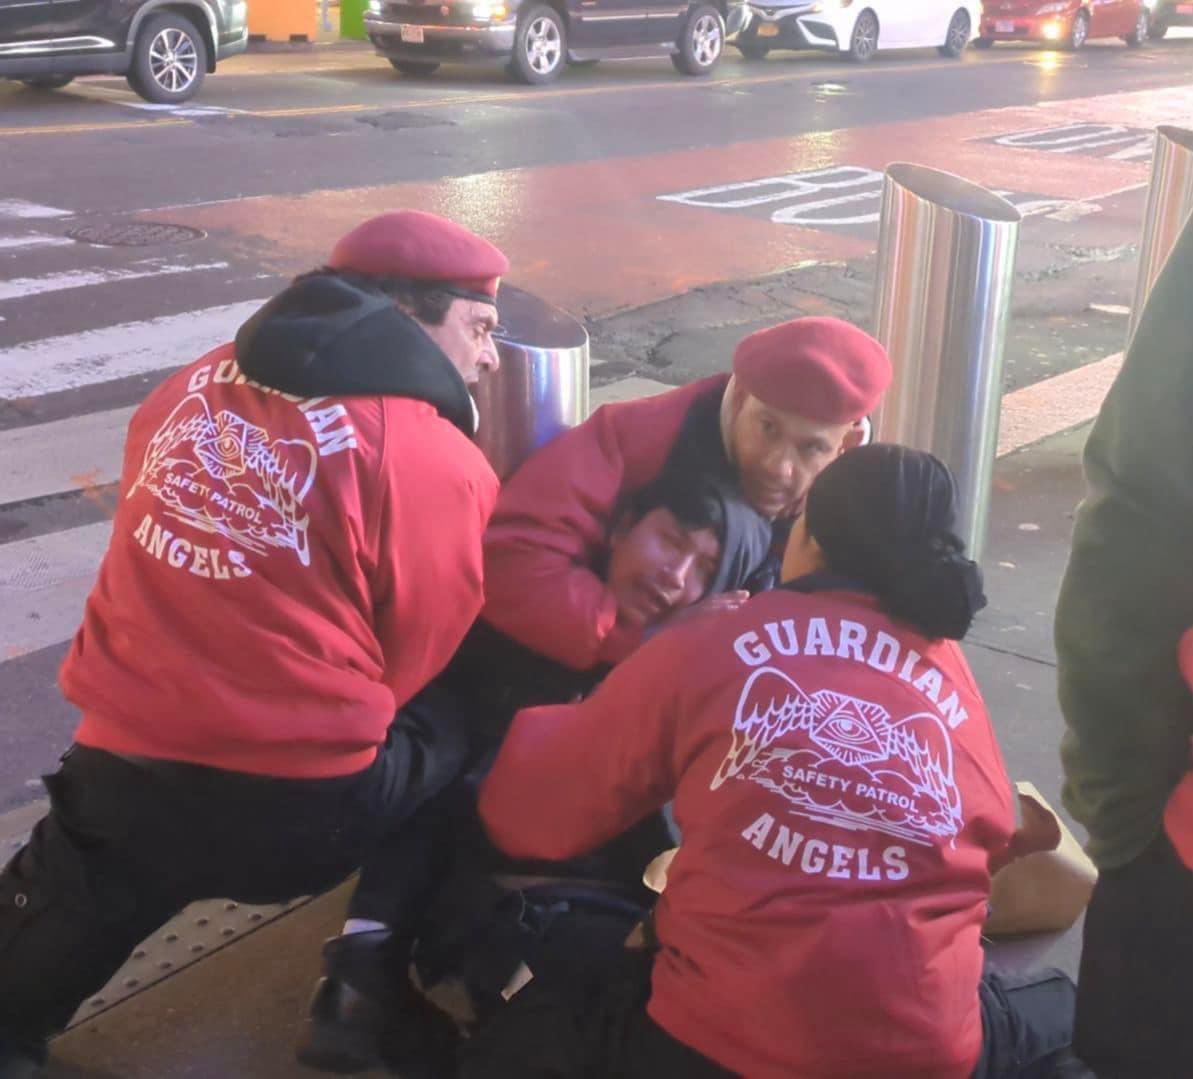 @RussellFosterTX Look at Curtis Sliwa here acting like he took down some hardened criminal when he was actually mugging for the camera for Hannity.